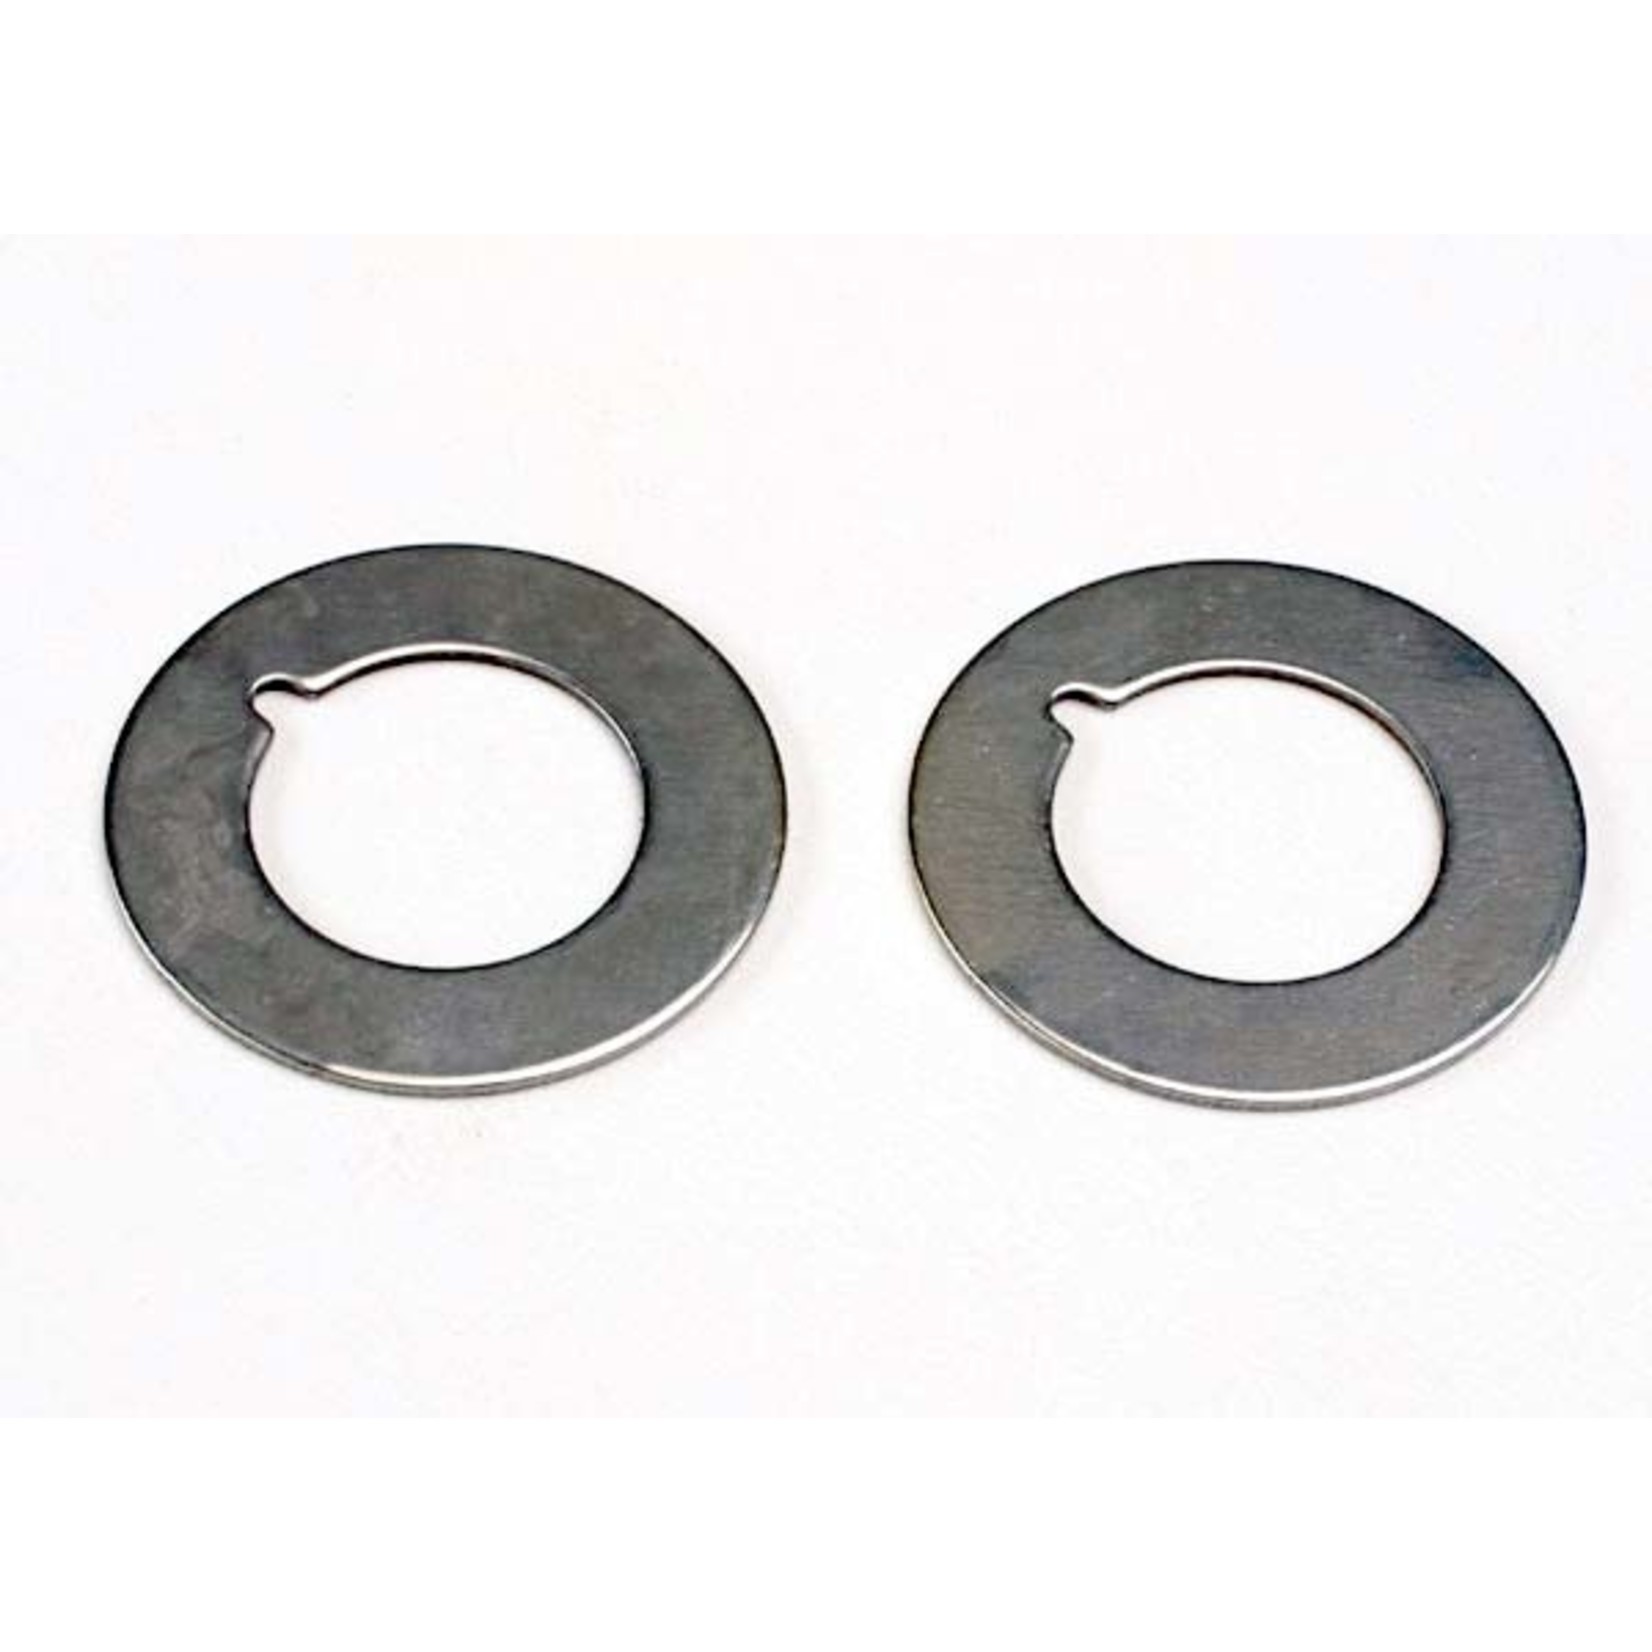 Traxxas 4622 - Pressure rings, slipper (notched) (2)